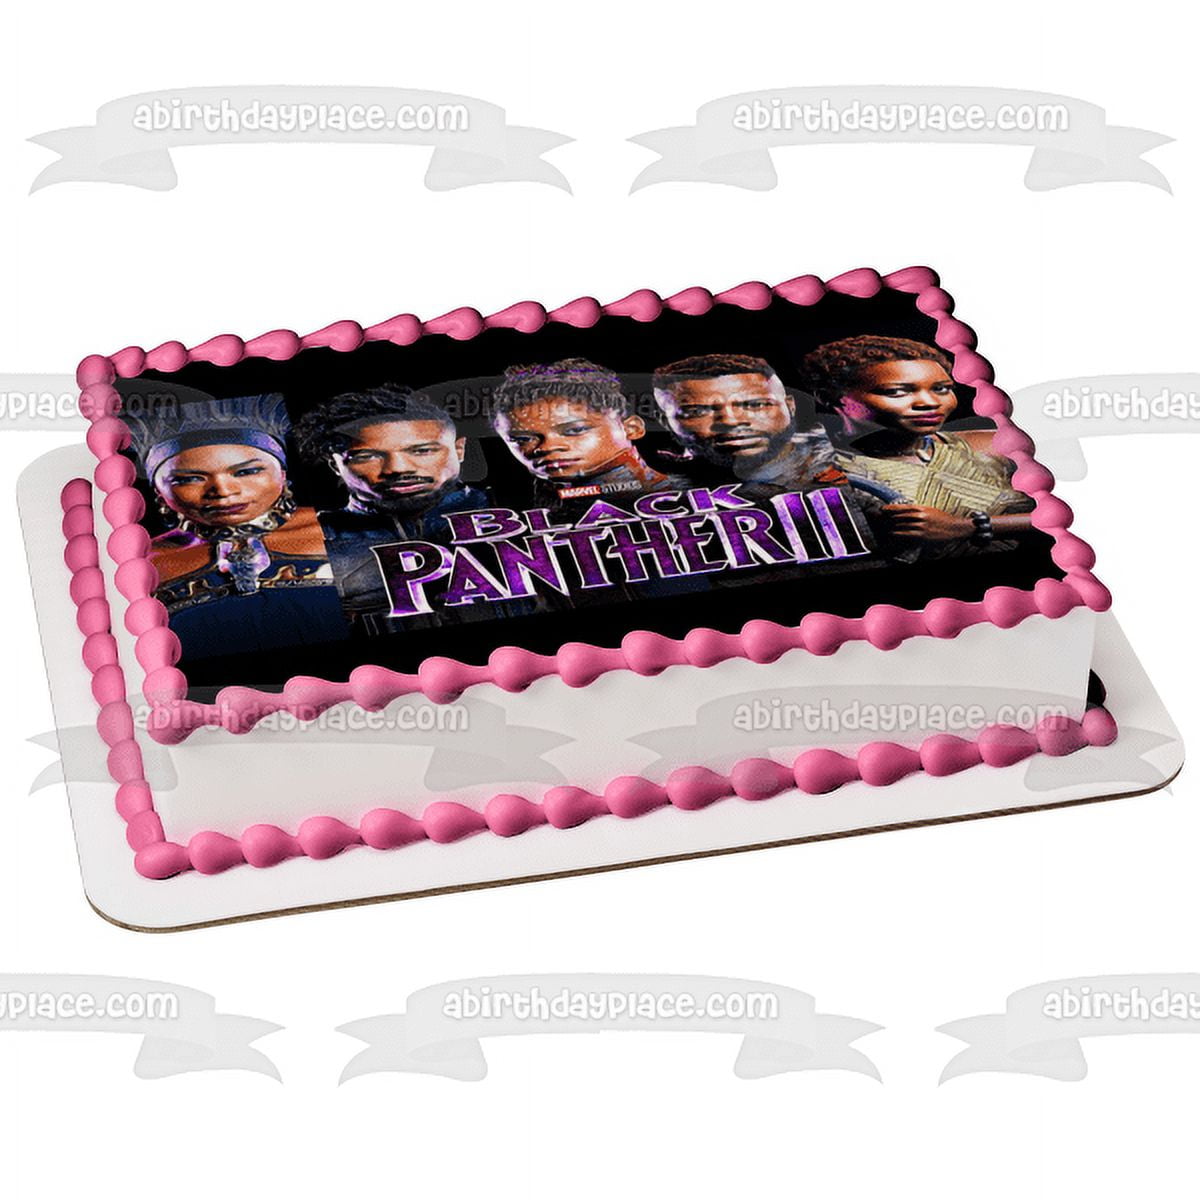 Black Panther cake topper - My Artistry World